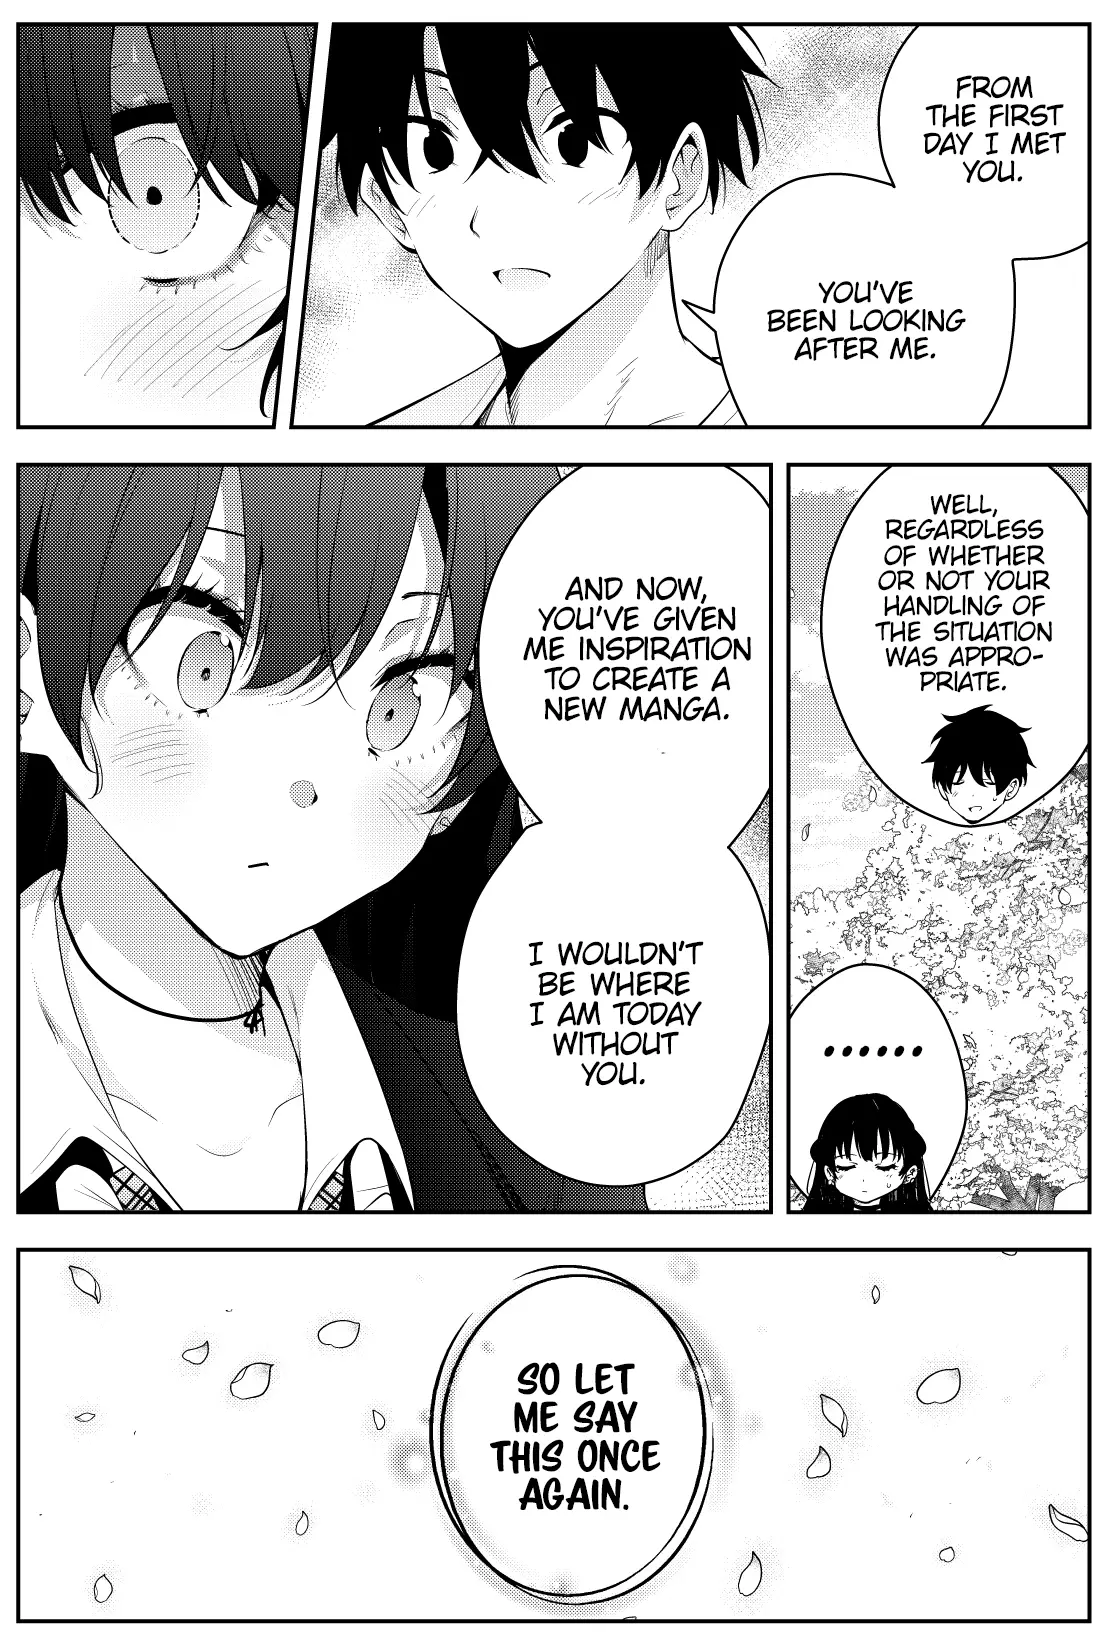 The Story Of A Manga Artist Confined By A Strange High School Girl - 48 page 6-0bc881c5